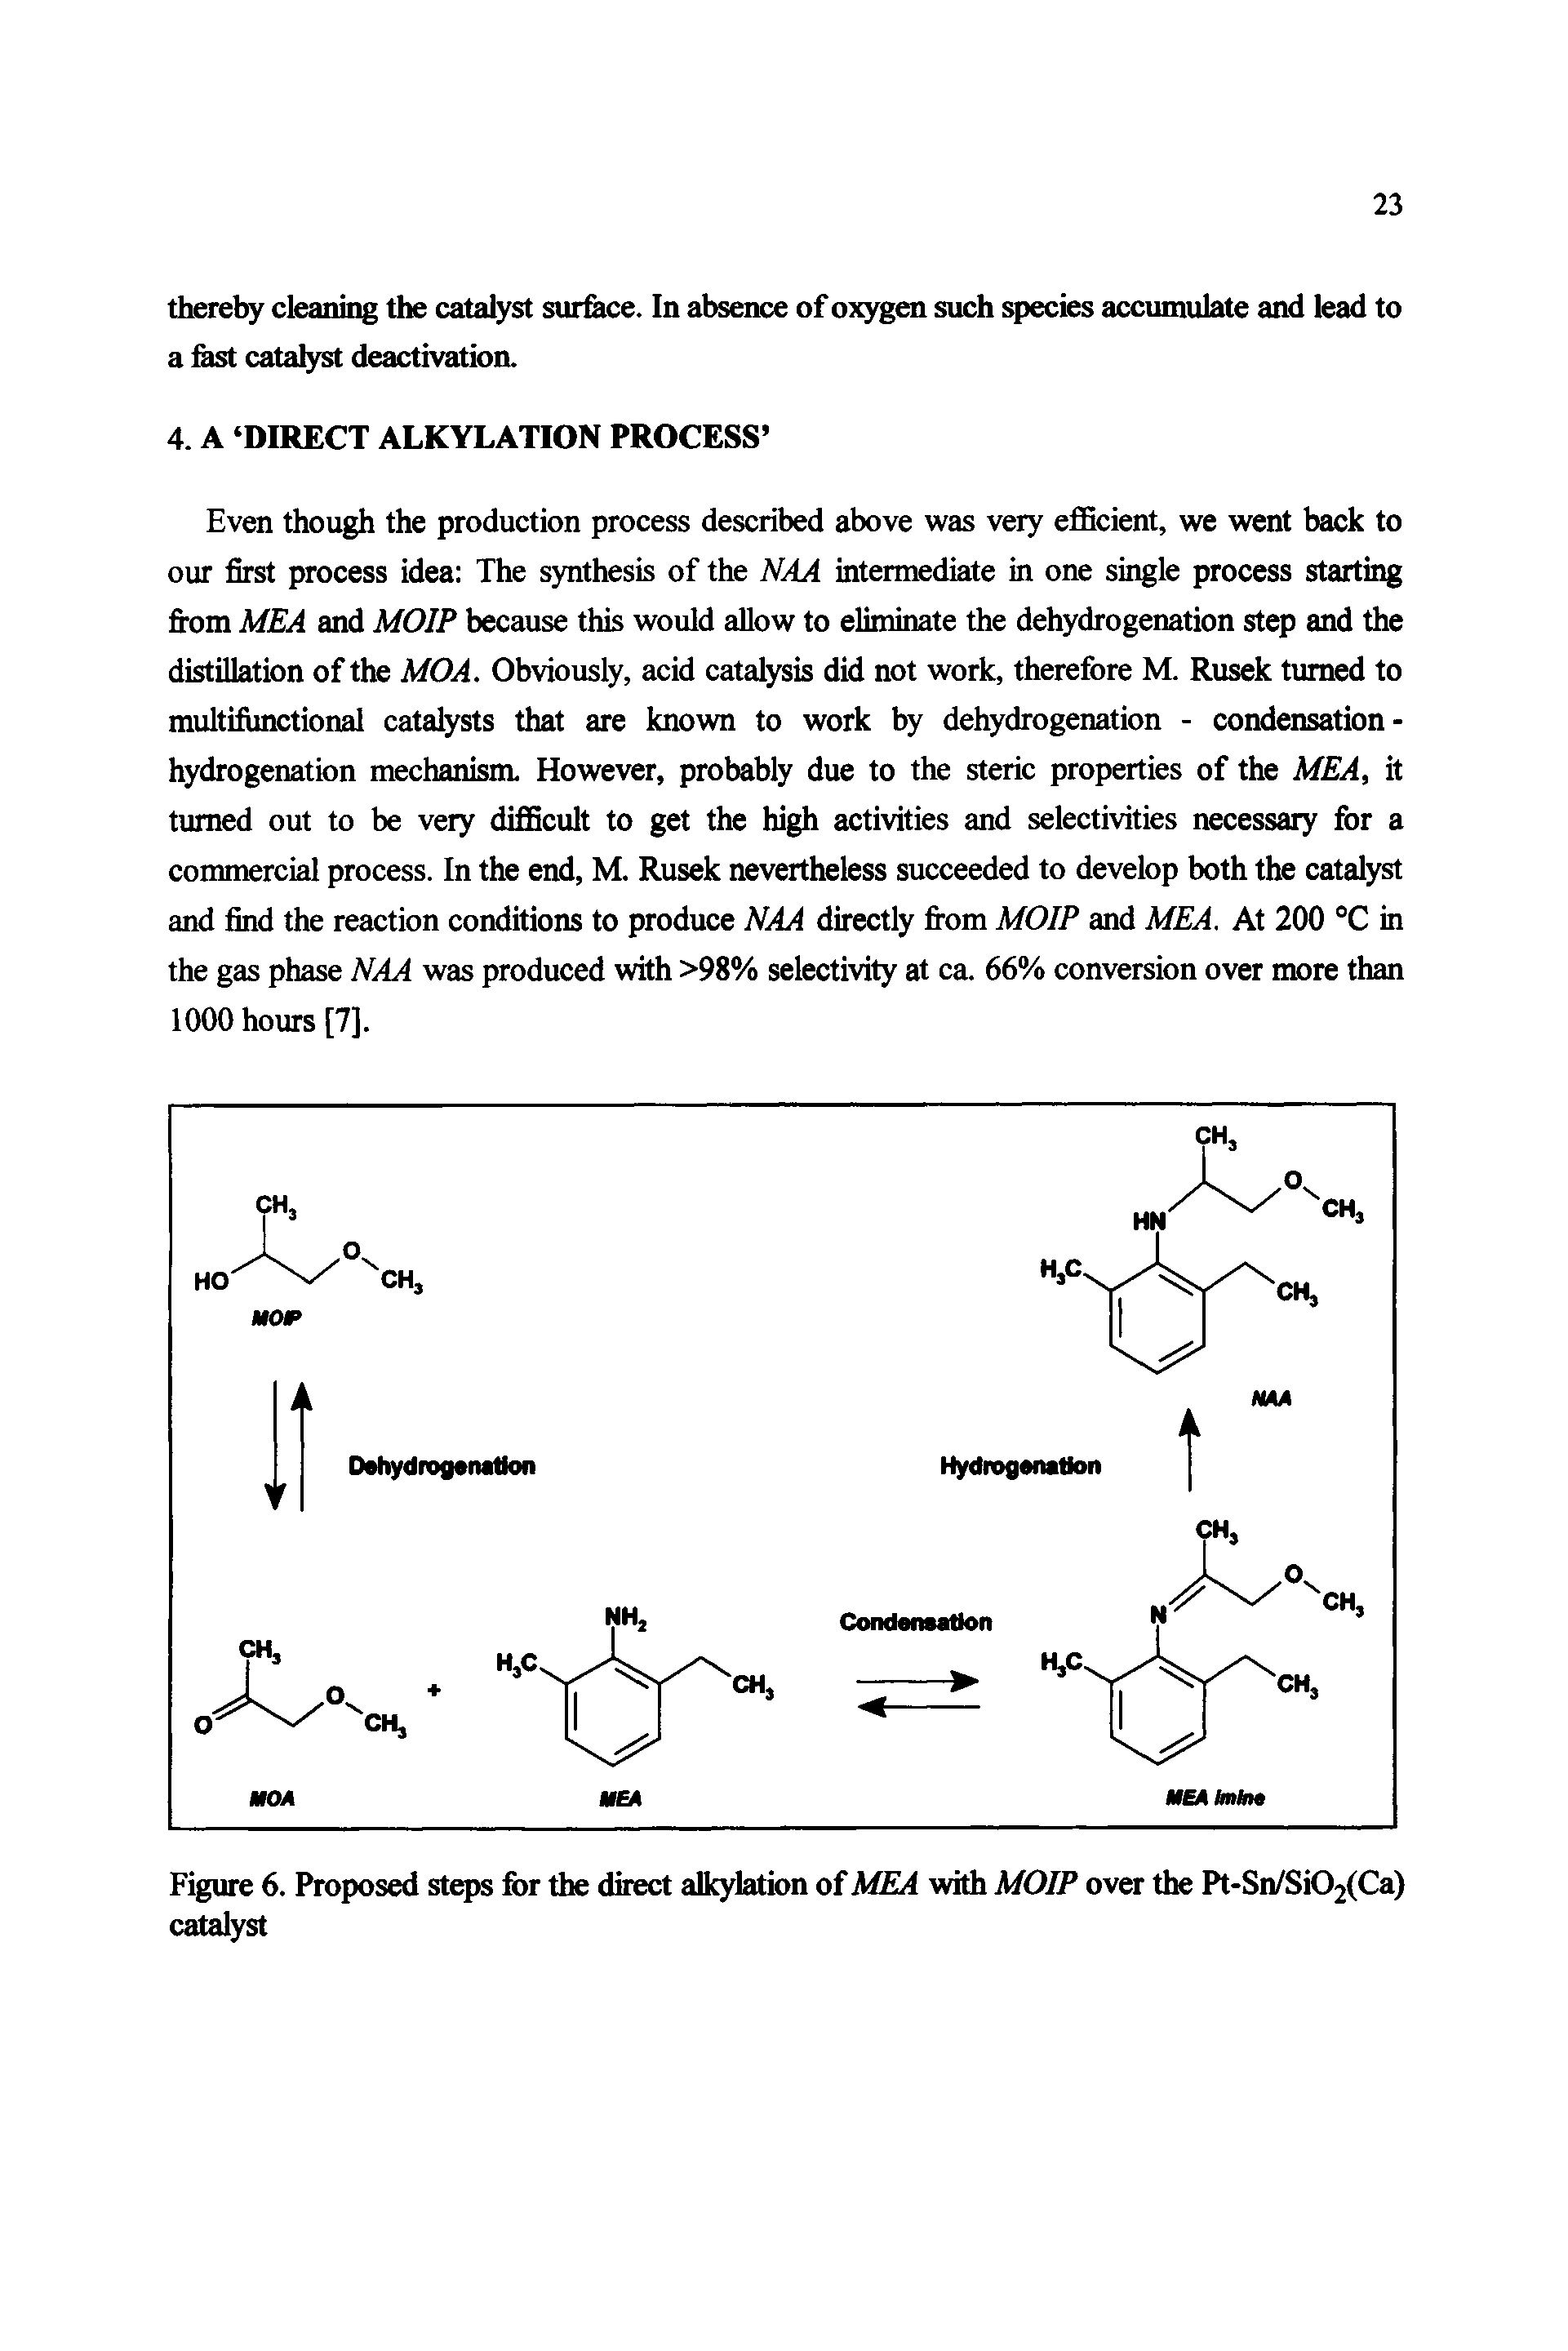 Figure 6. Proposed steps for the direct alkylation of MEA with MOIP over the Pt-Sn/Si02(Ca) catalyst...